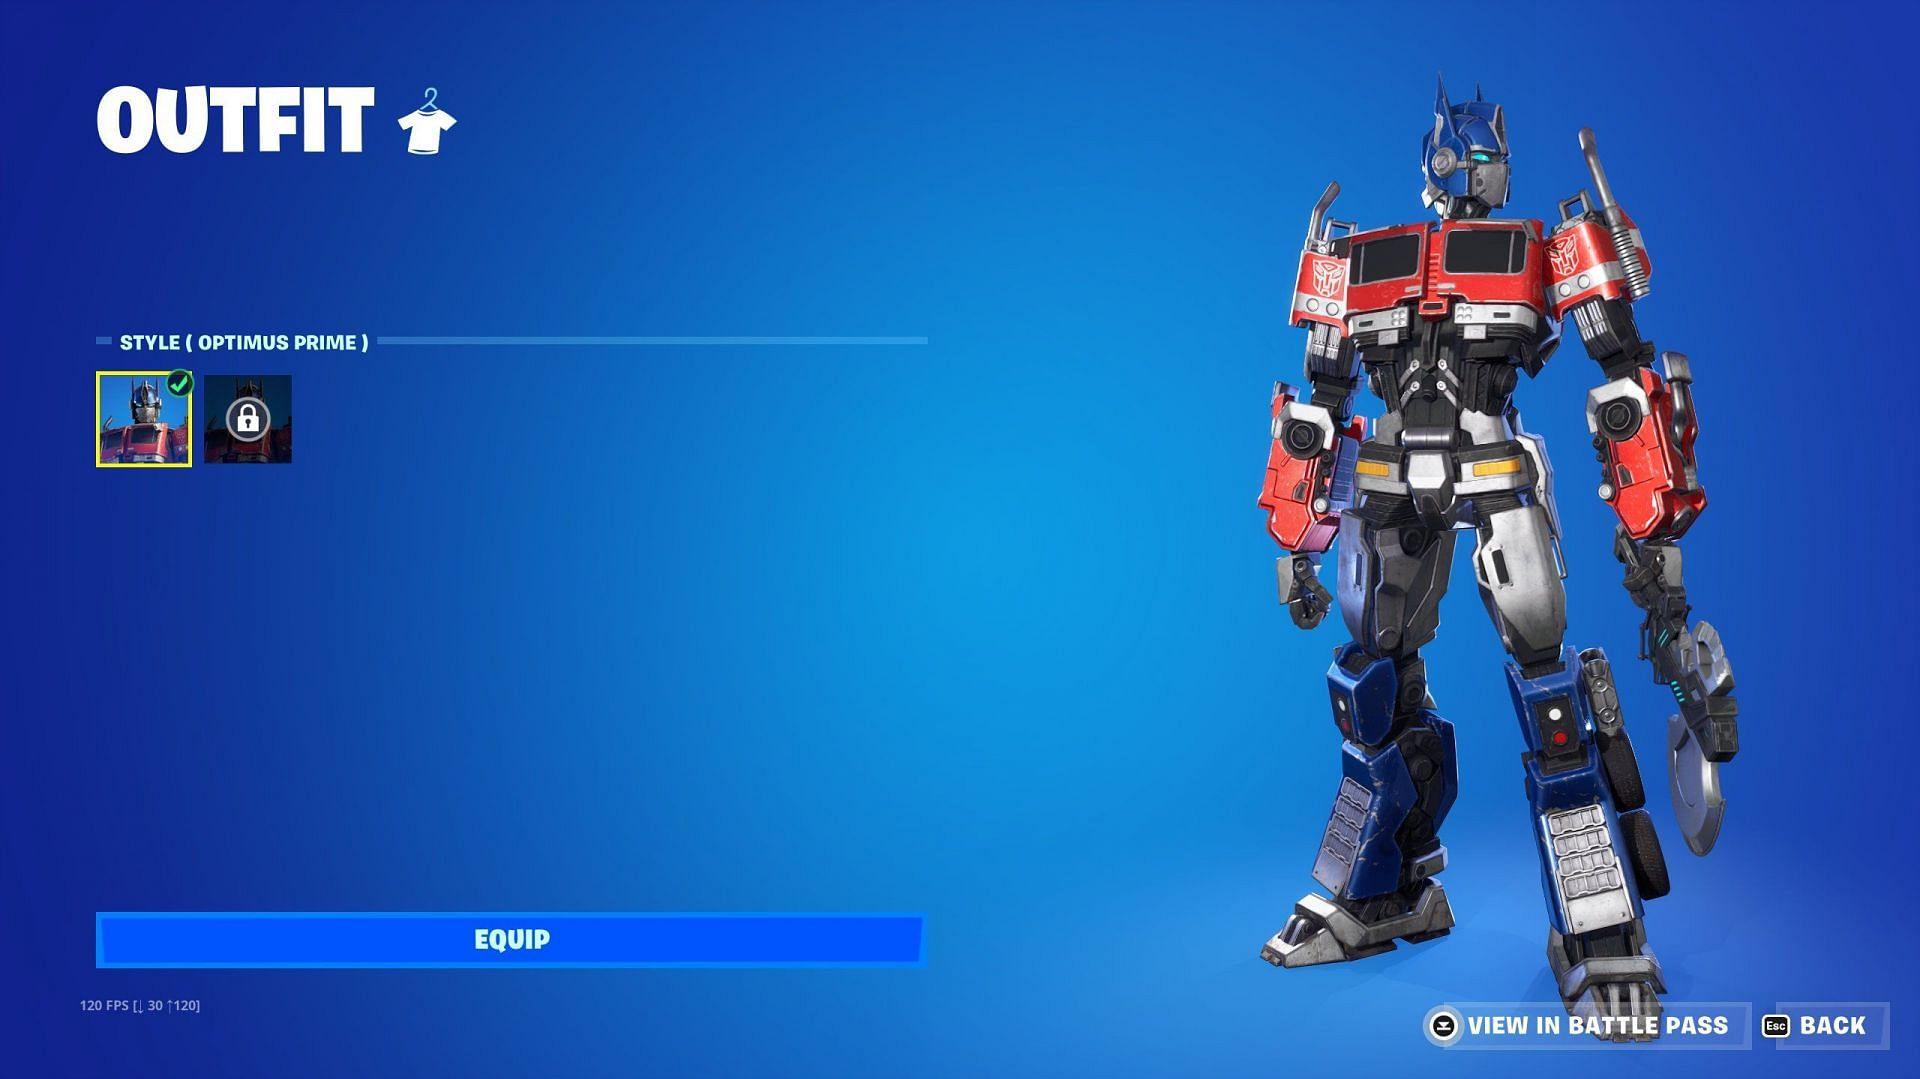 How To Get The Optimus Prime Skin In Fortnite